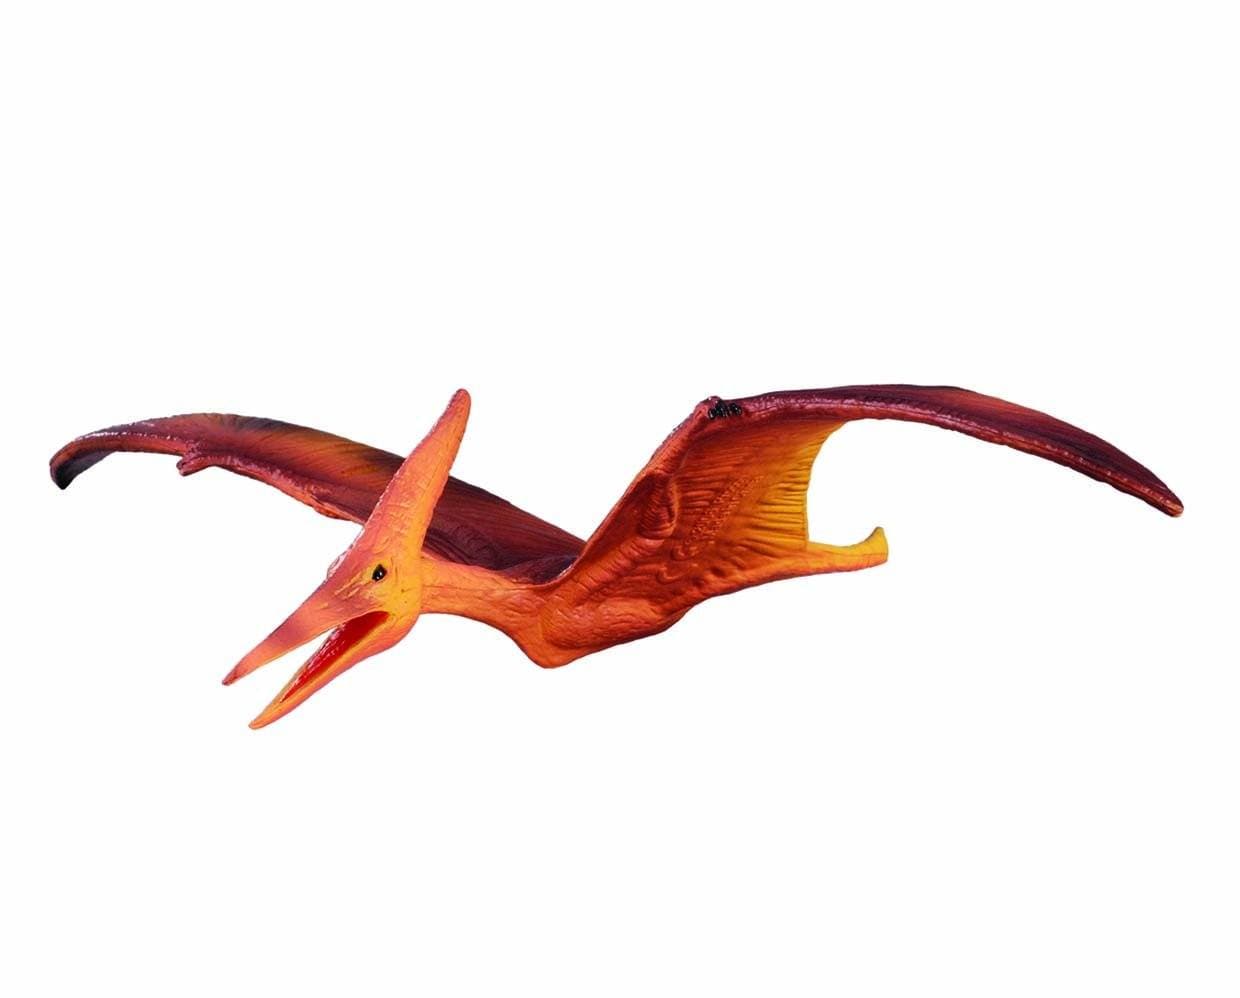 Pterodactyl: Facts about pteranodon and other pterosaurs